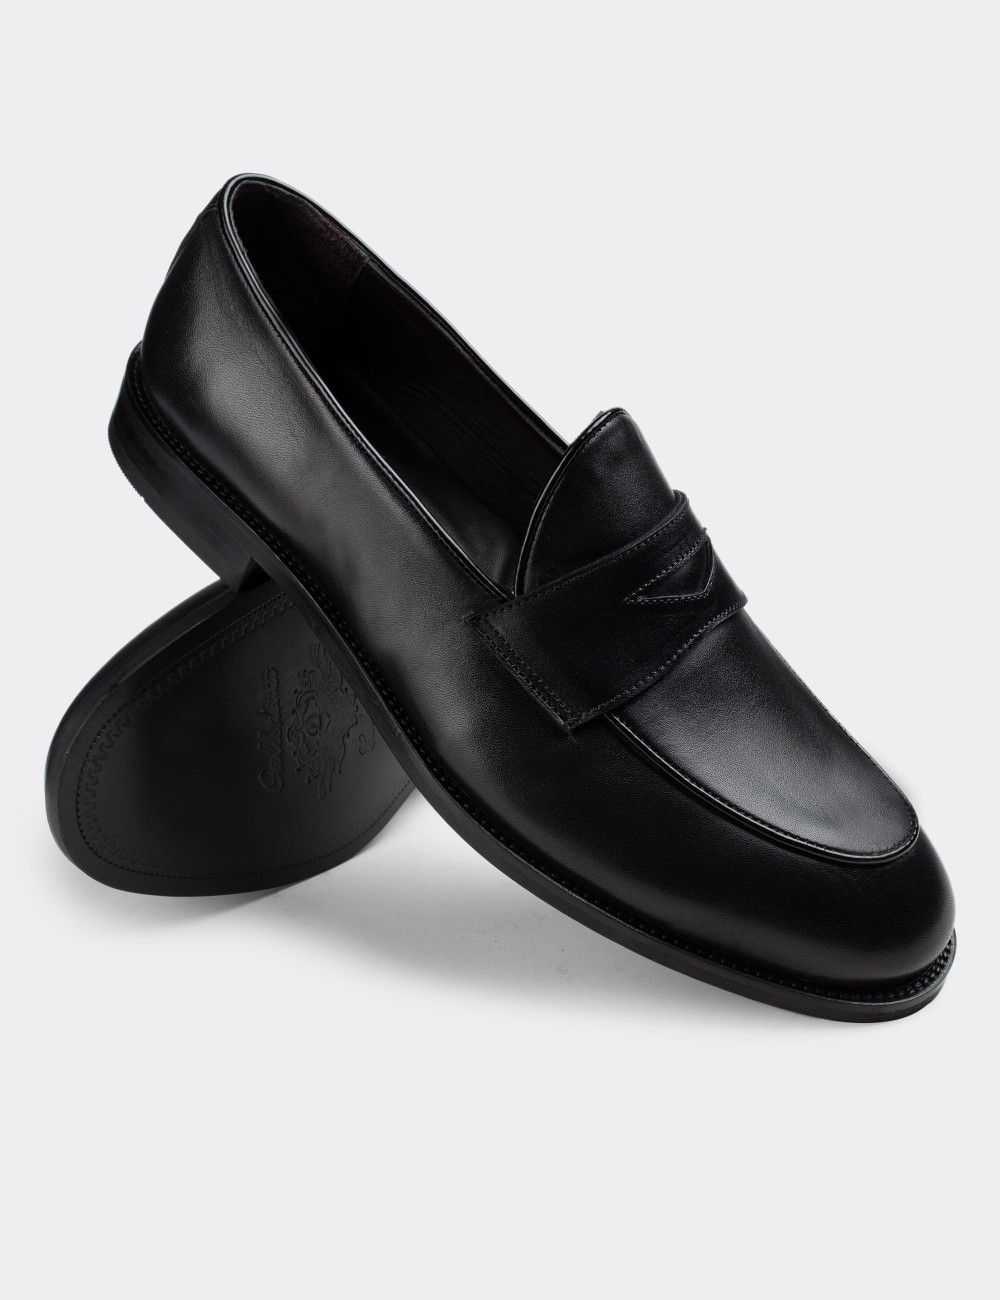 Black  Leather Classic Shoes - 01845MSYHN01